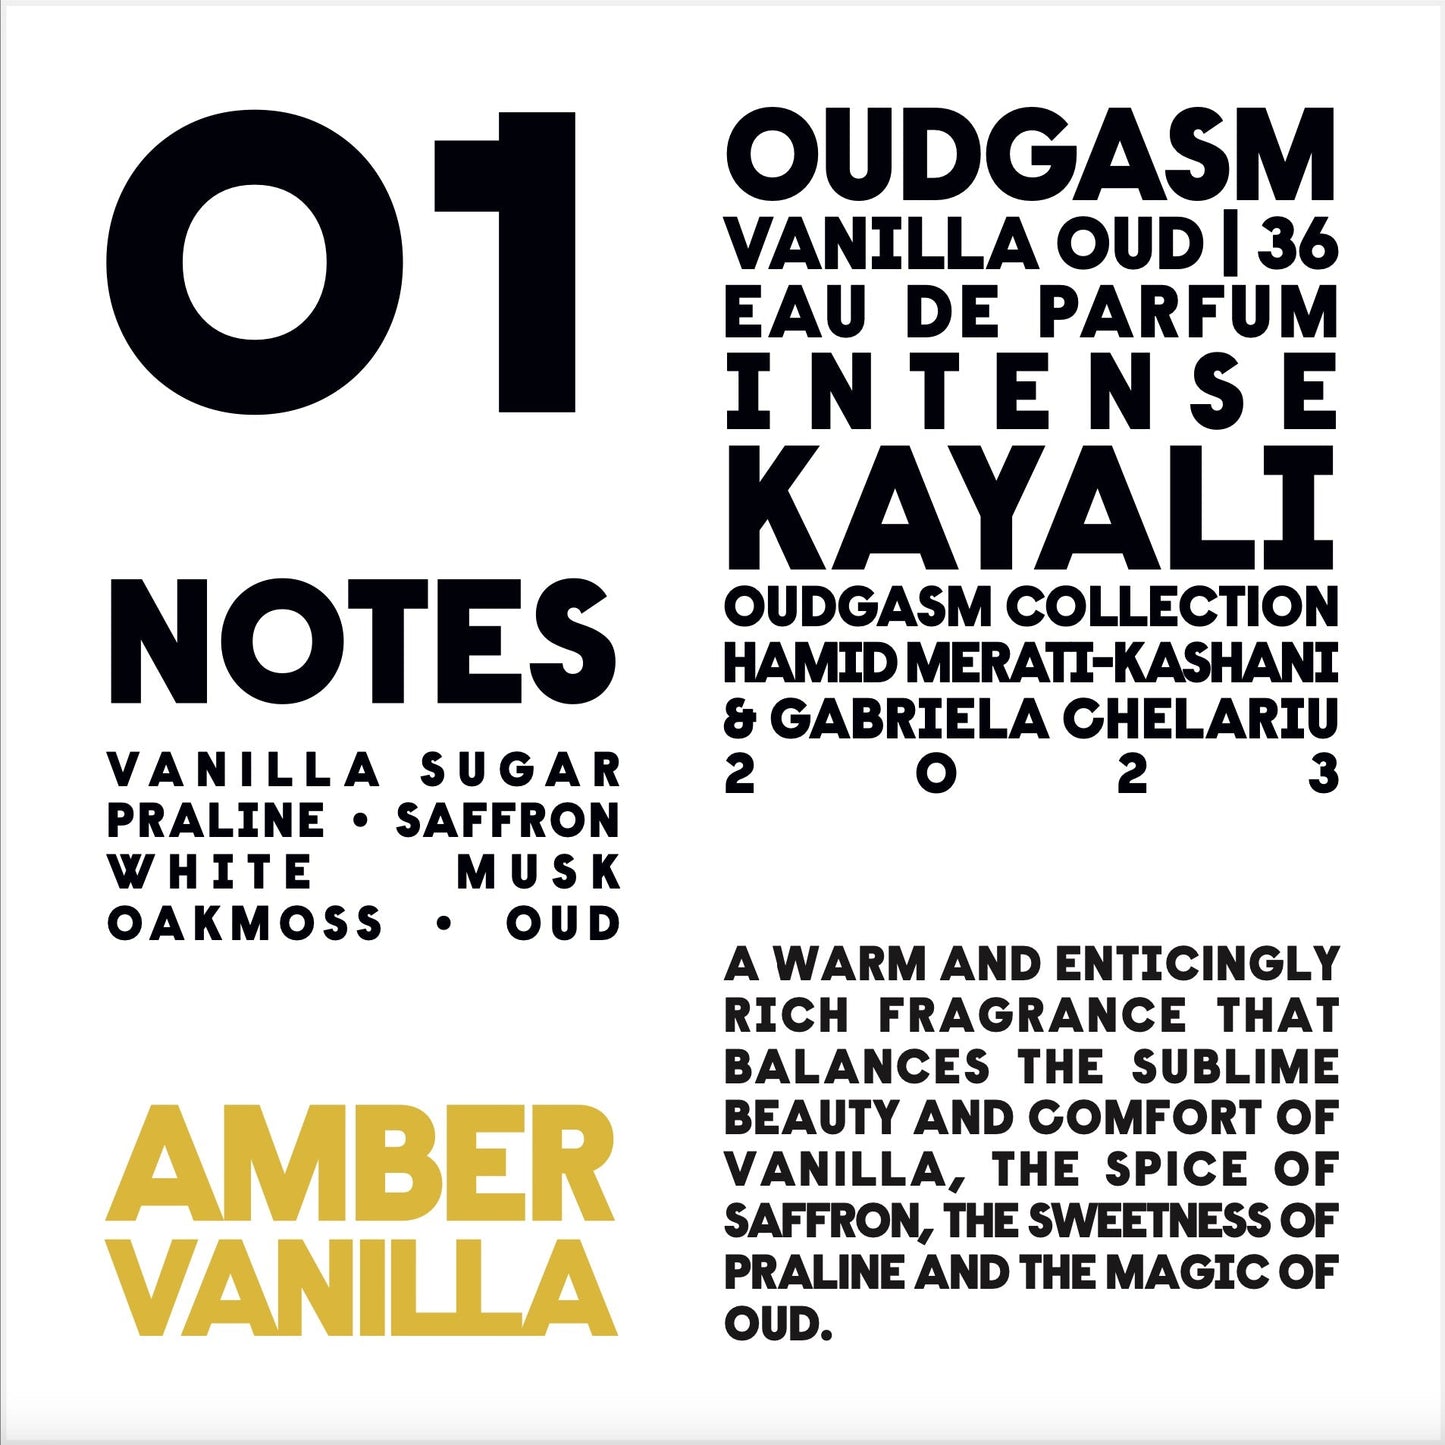 5ml Bottle - Oudgasm Vanilla Oud by Kayali (From ScentClub Kit #7)